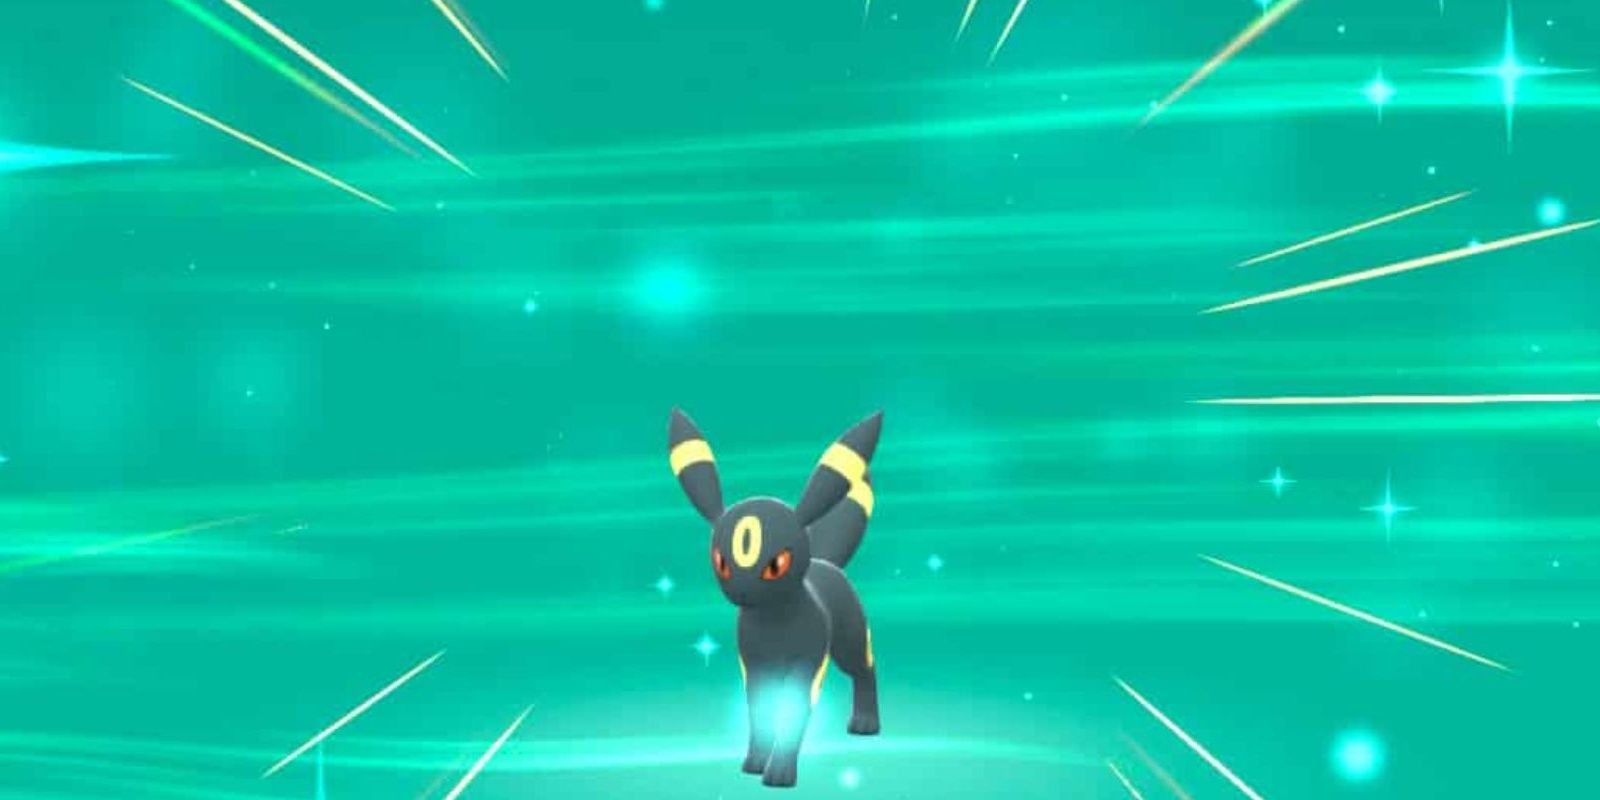 Umbreon is one of the few Pokemon bale to learn Moonlight